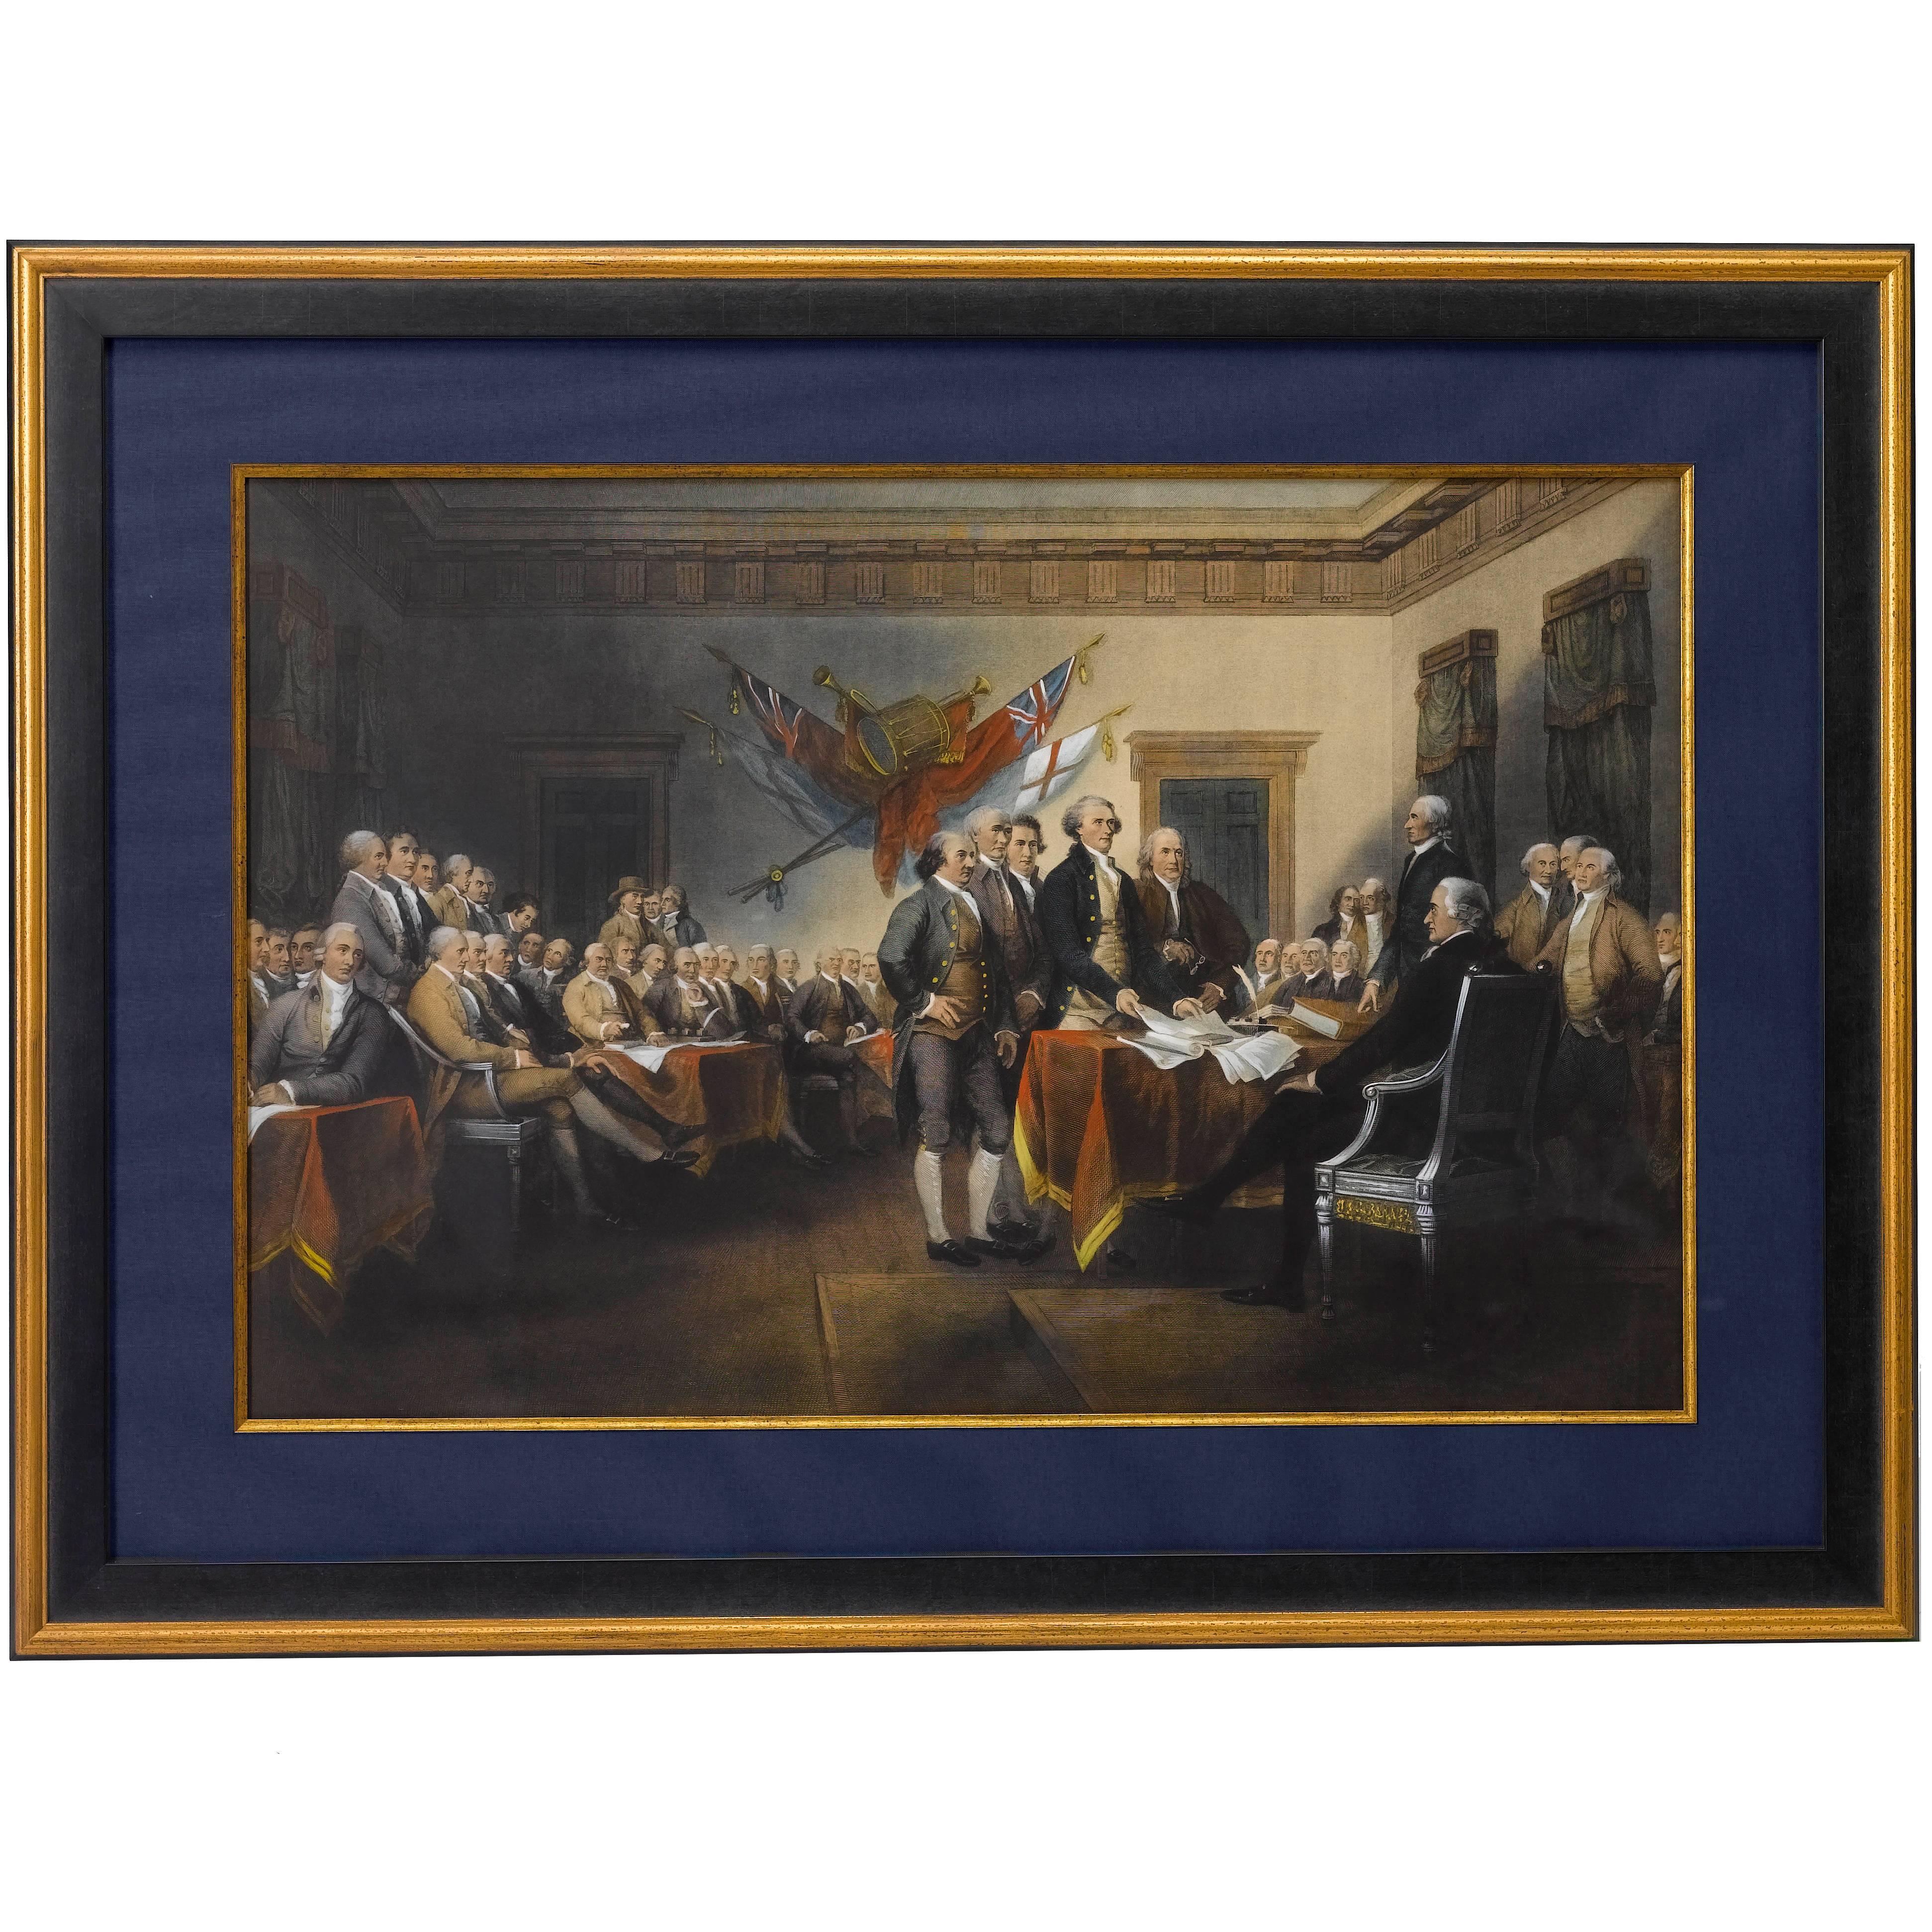 1876 Signing of the Declaration of Independence Engraving by Ormsby